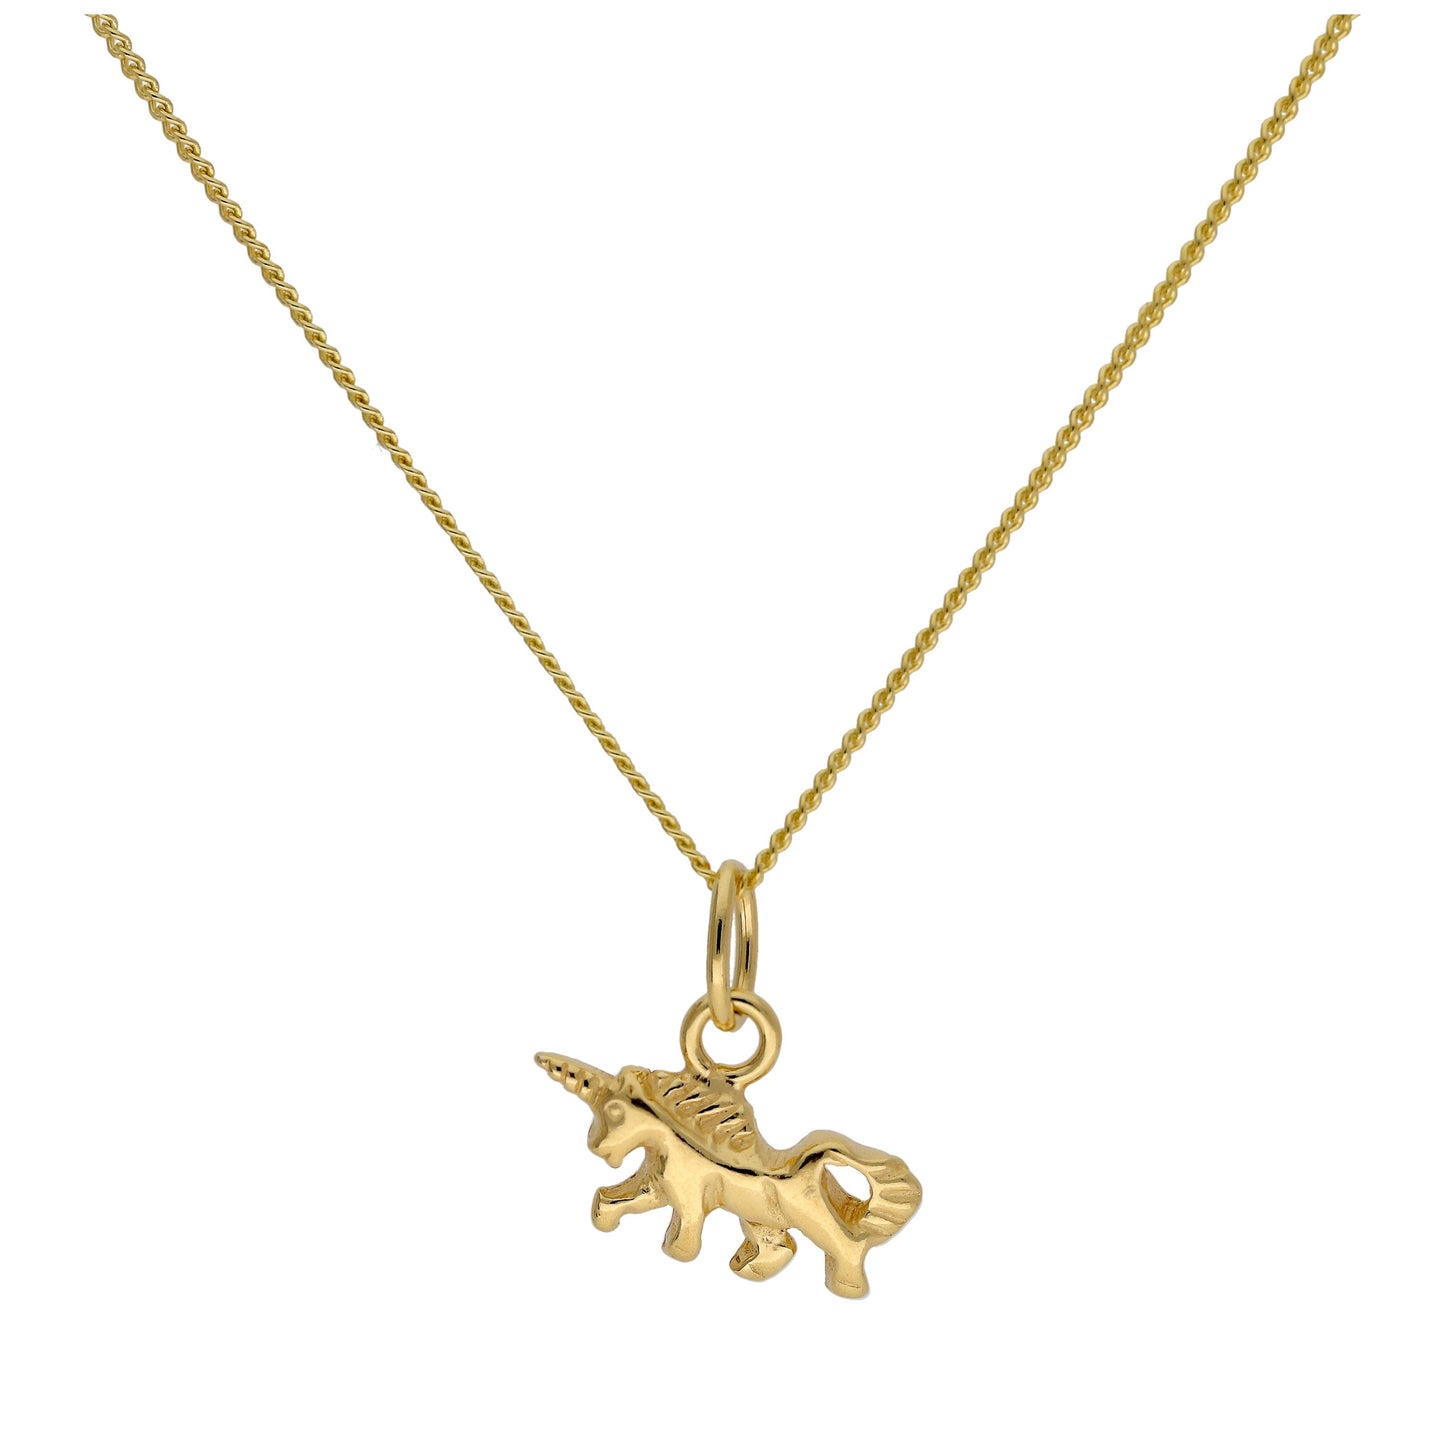 Tiny Gold Plated Sterling Silver Unicorn Necklace 14 - 32 Inch